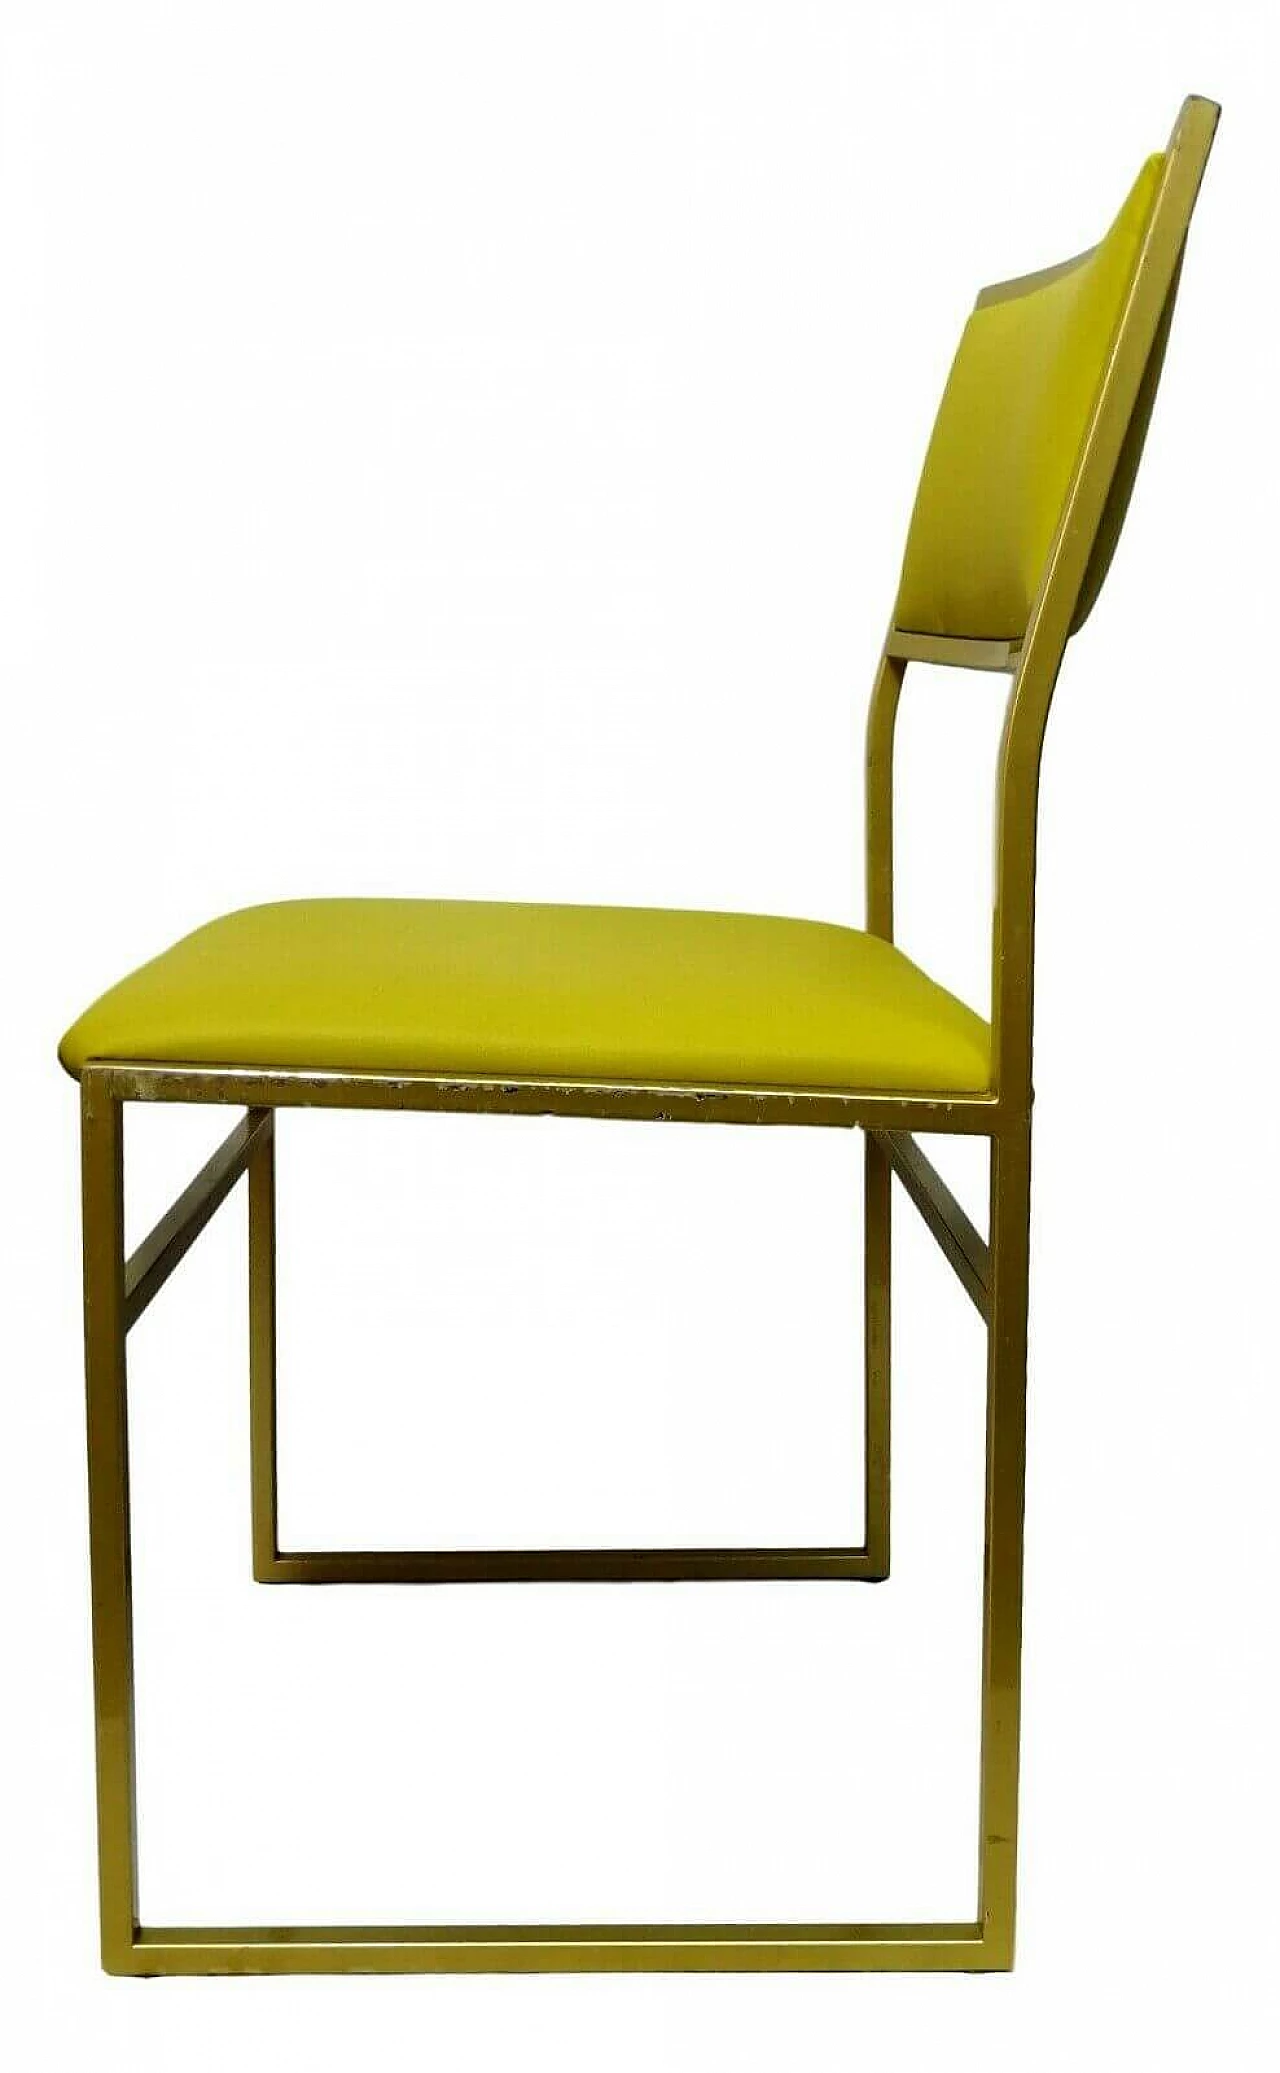 Metal chair and acid green seat, 70s 1166243